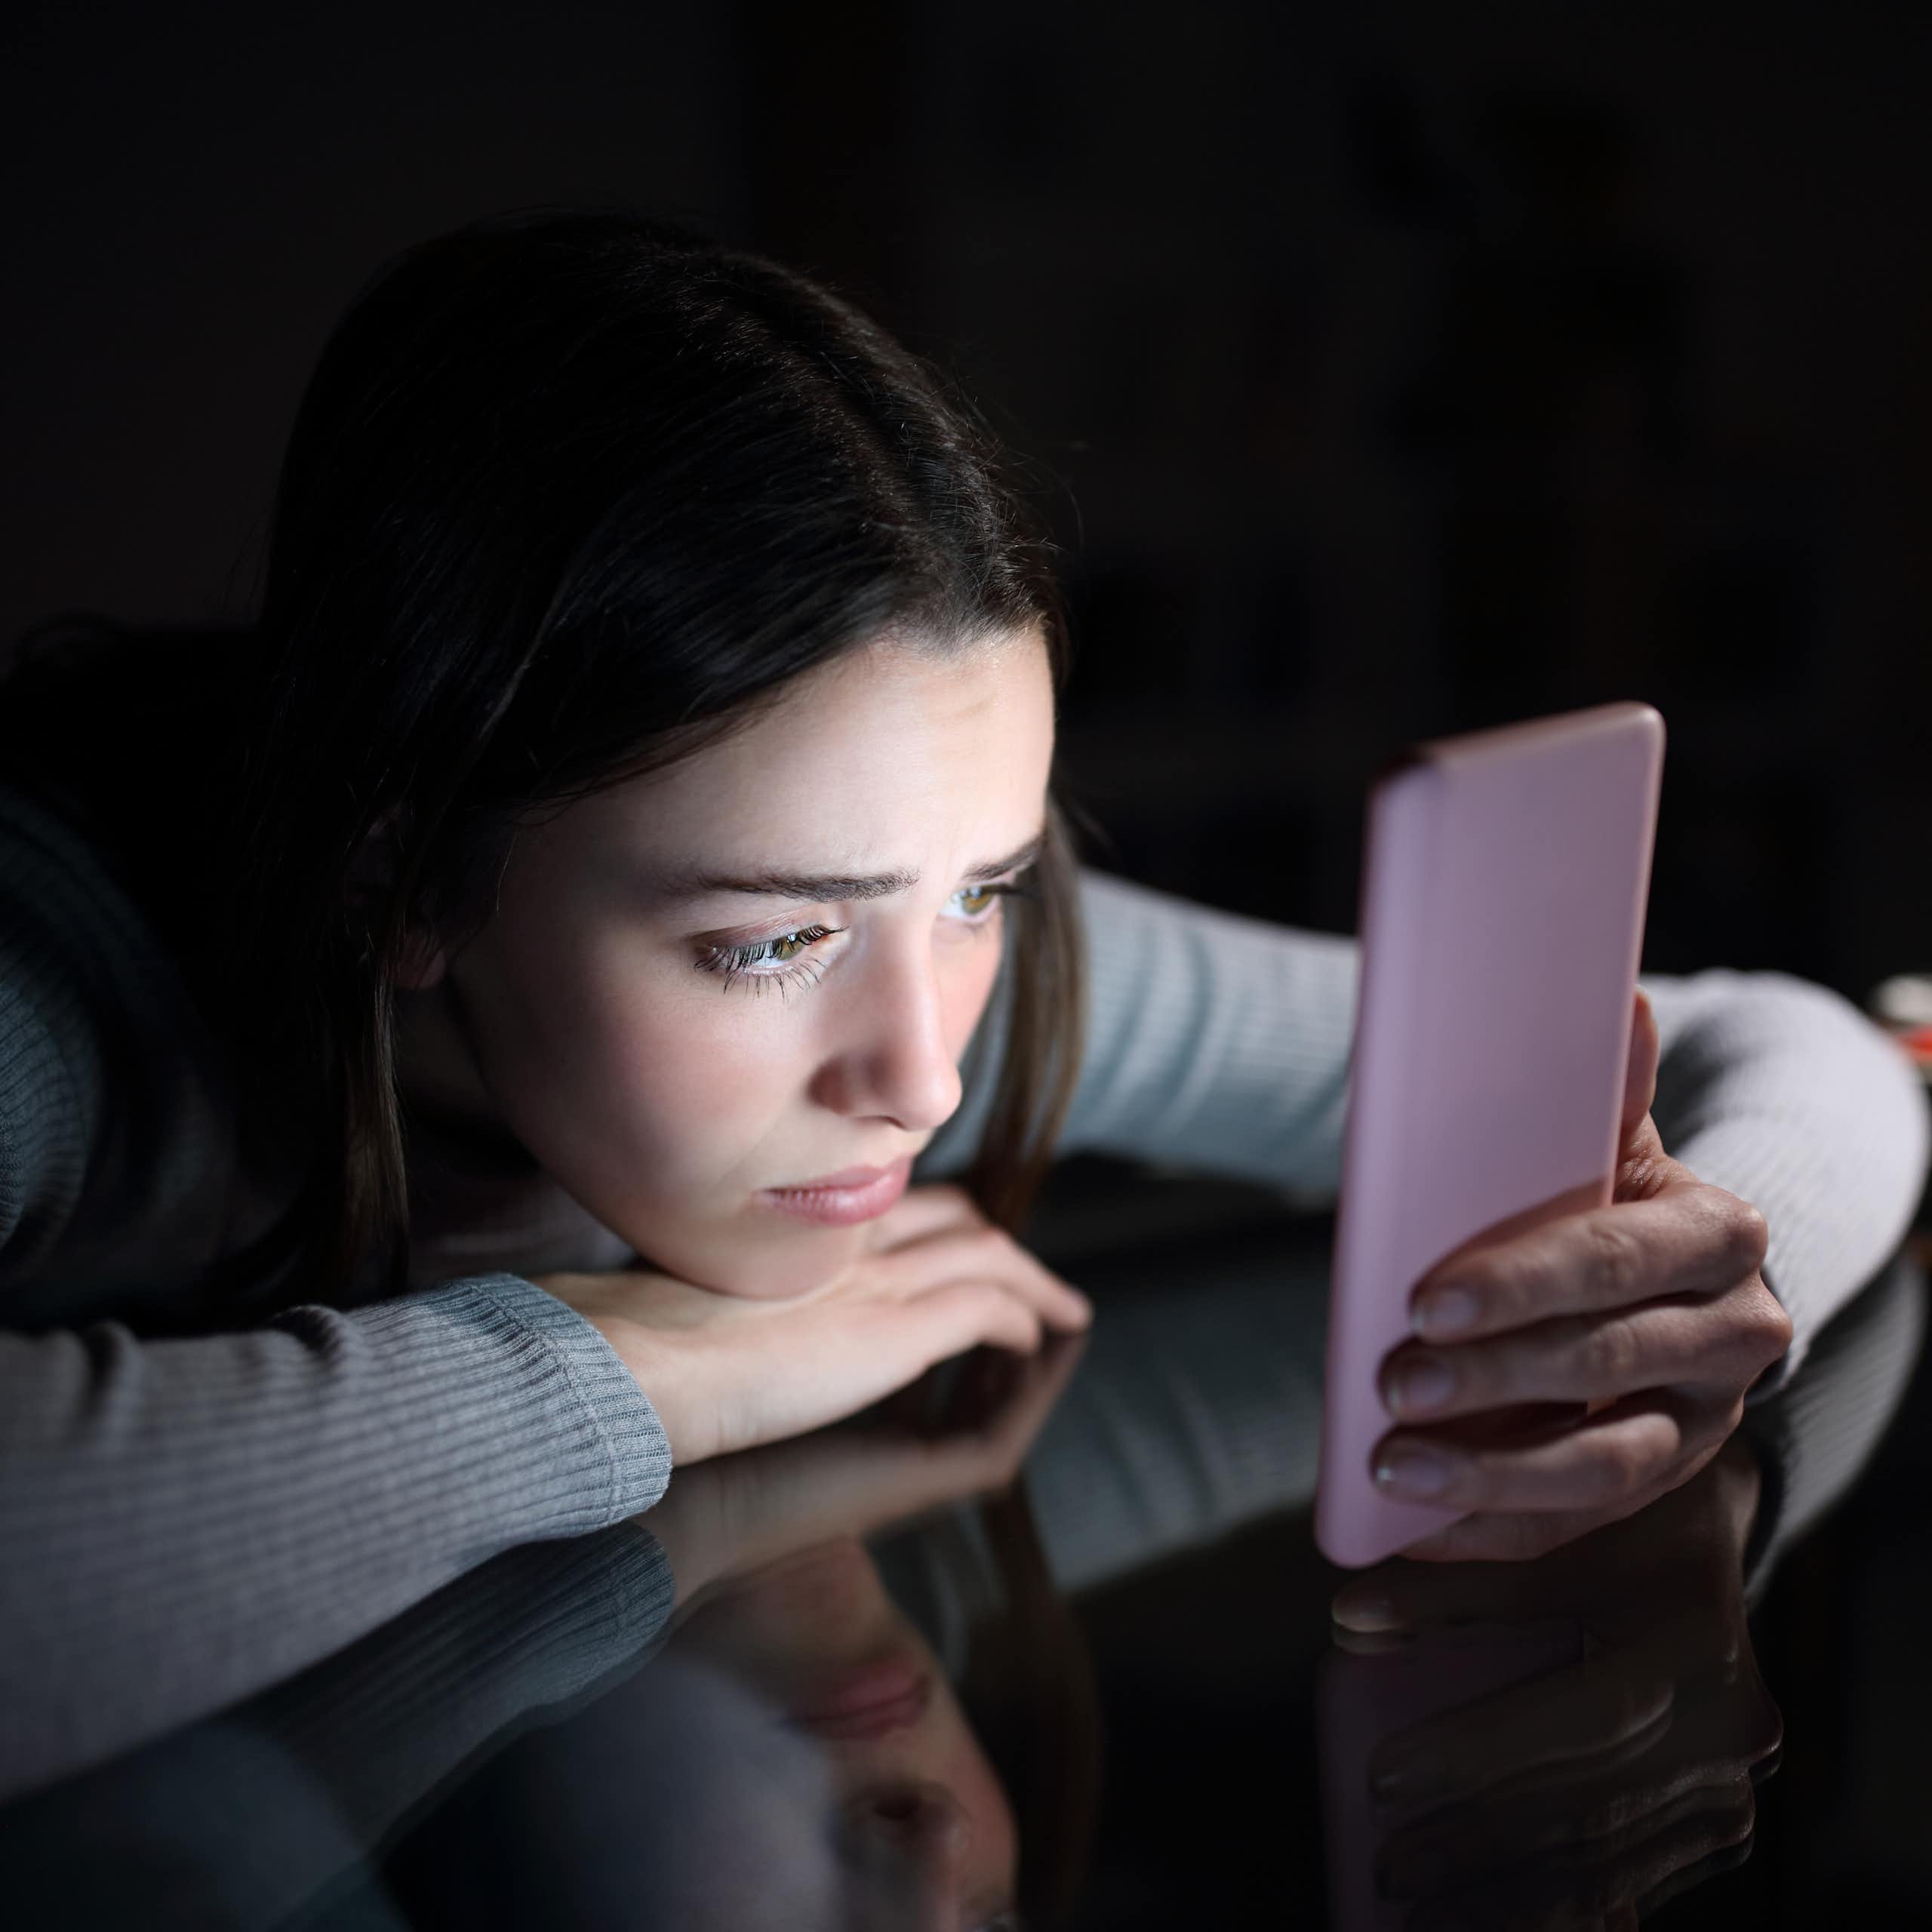 Have smartphones created an ‘anxious generation’? Jonathan Haidt sounds the alarm